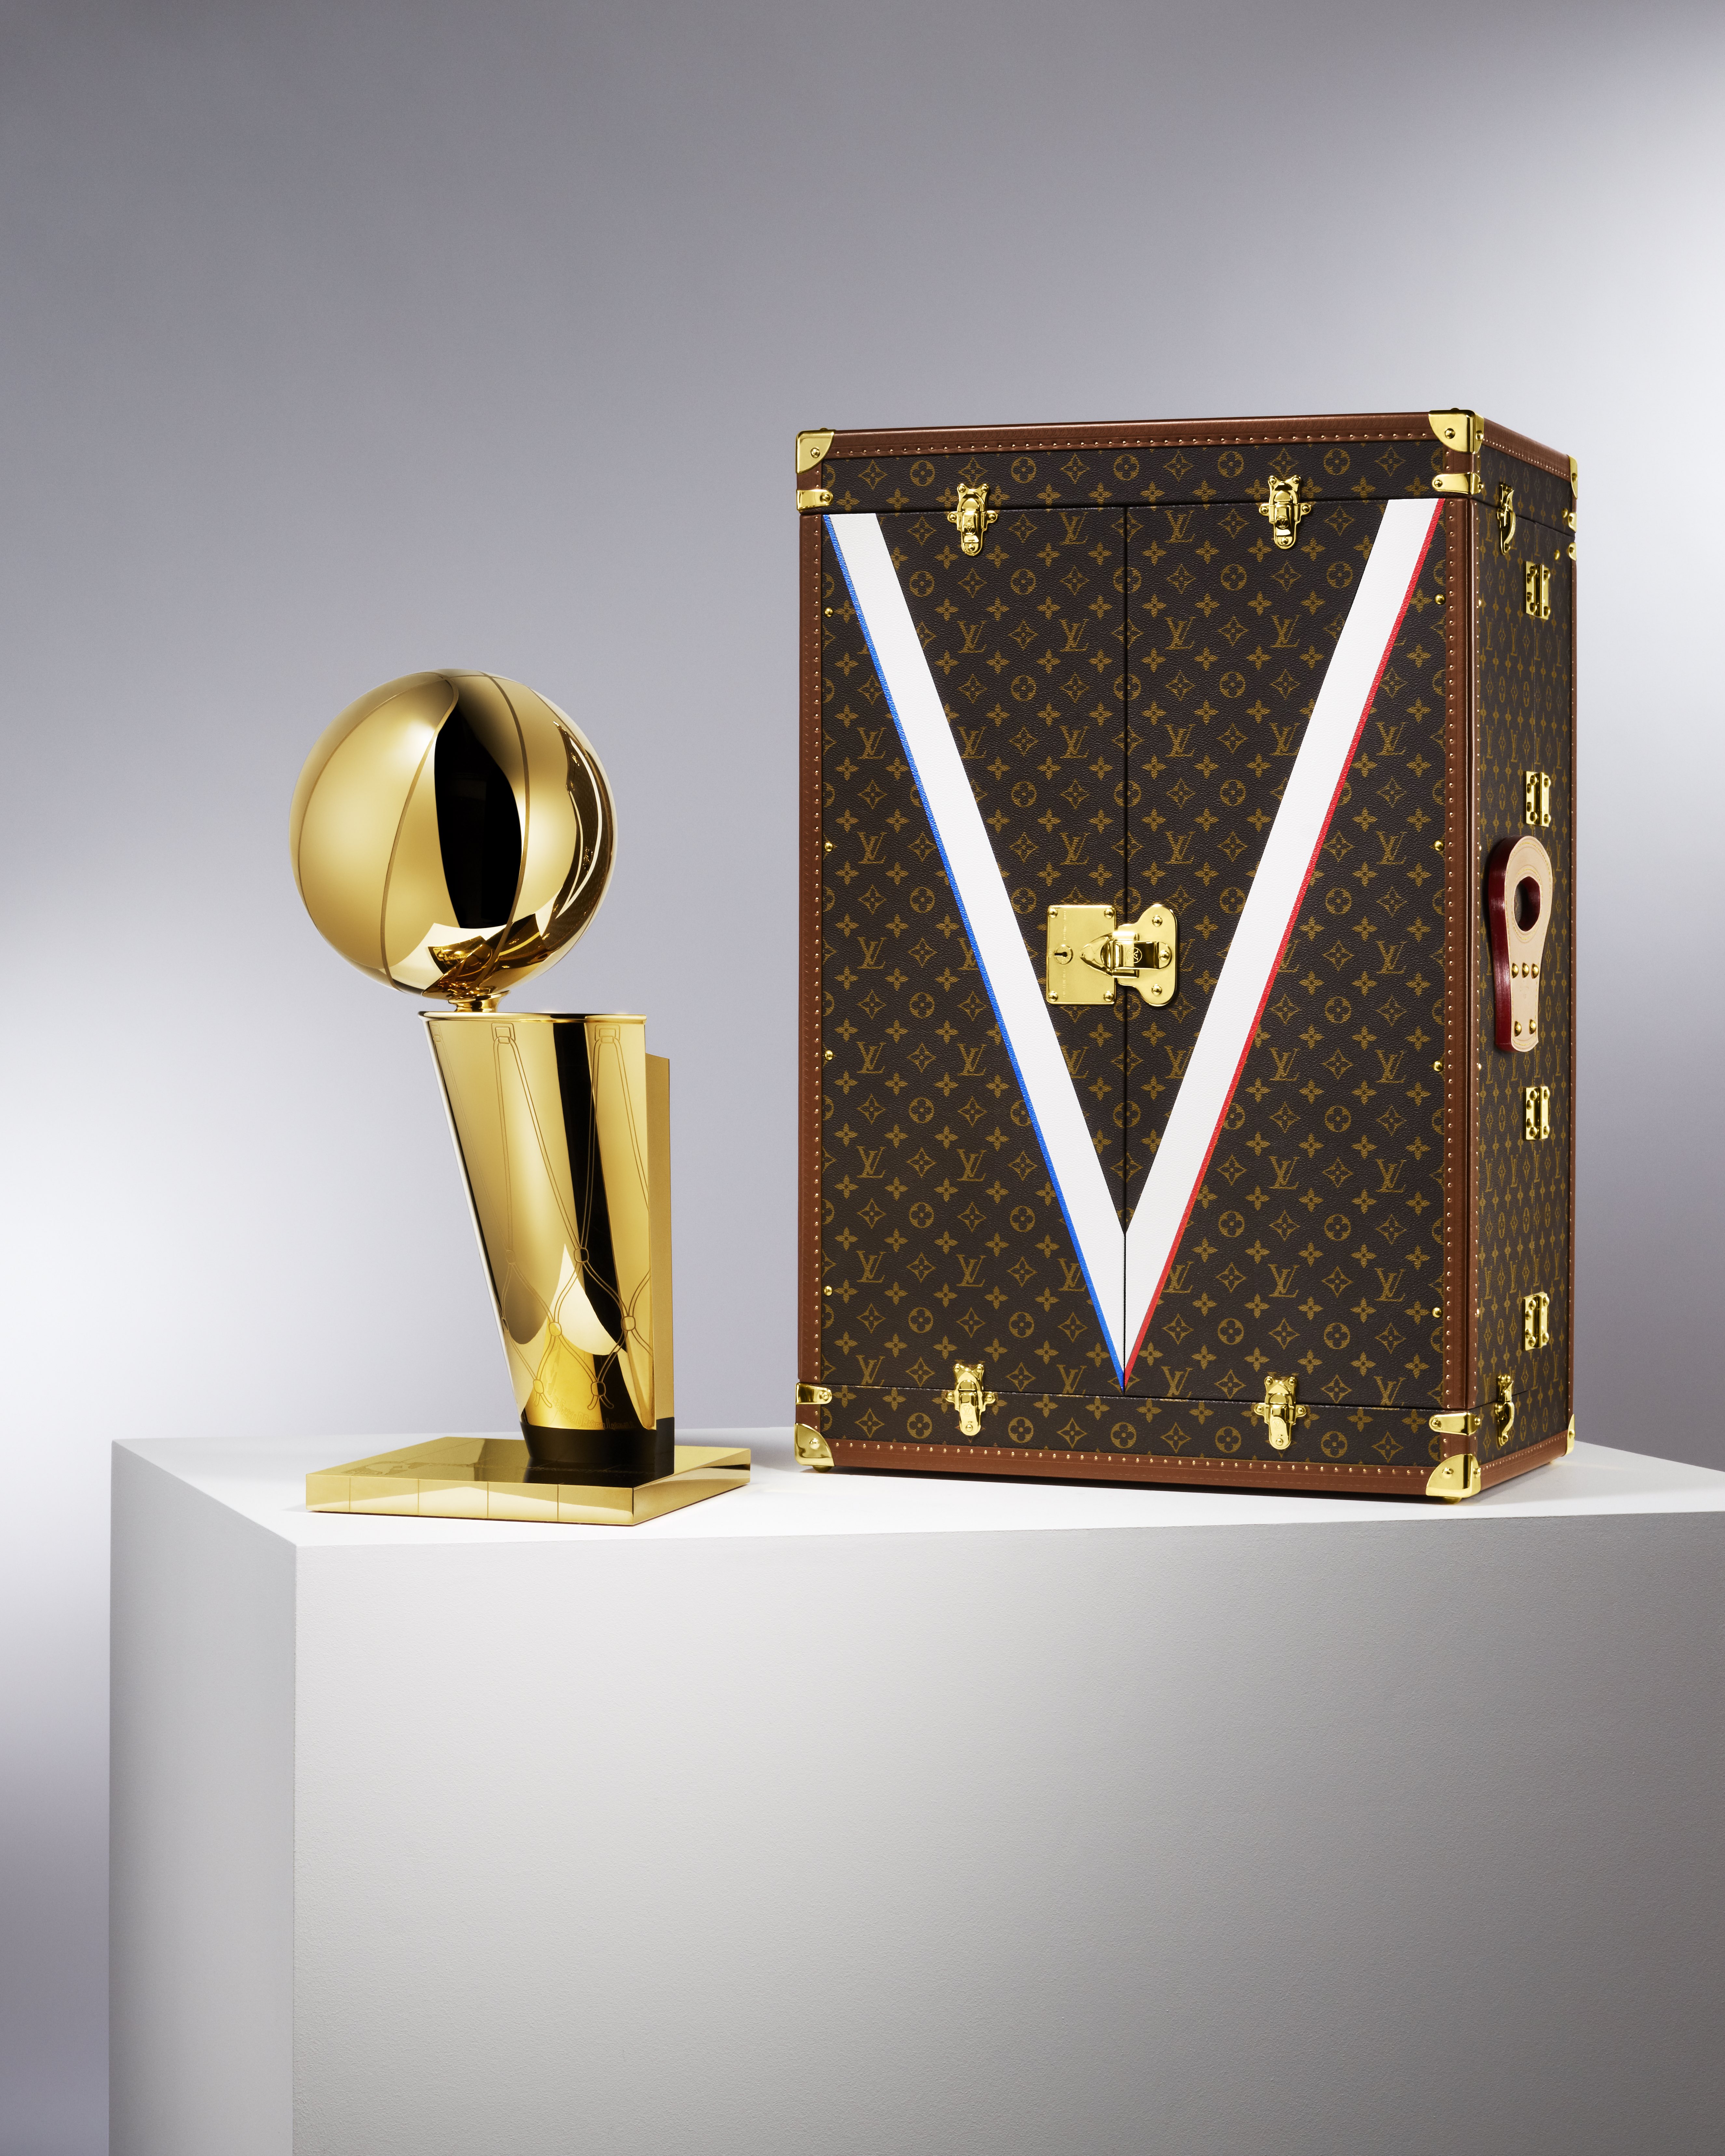 Louis Vuitton - A showcase of tradition and heritage. For